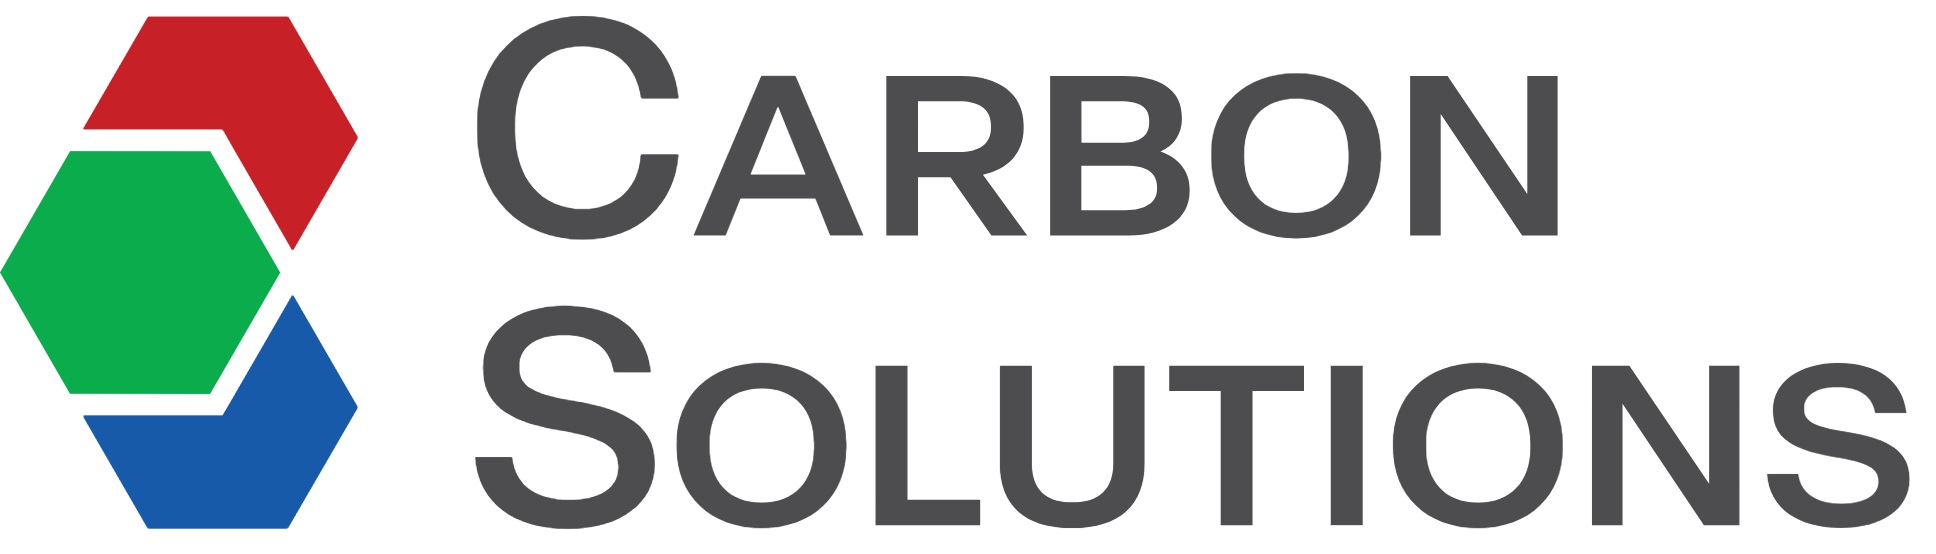 Carbon Solutions Logo and Link